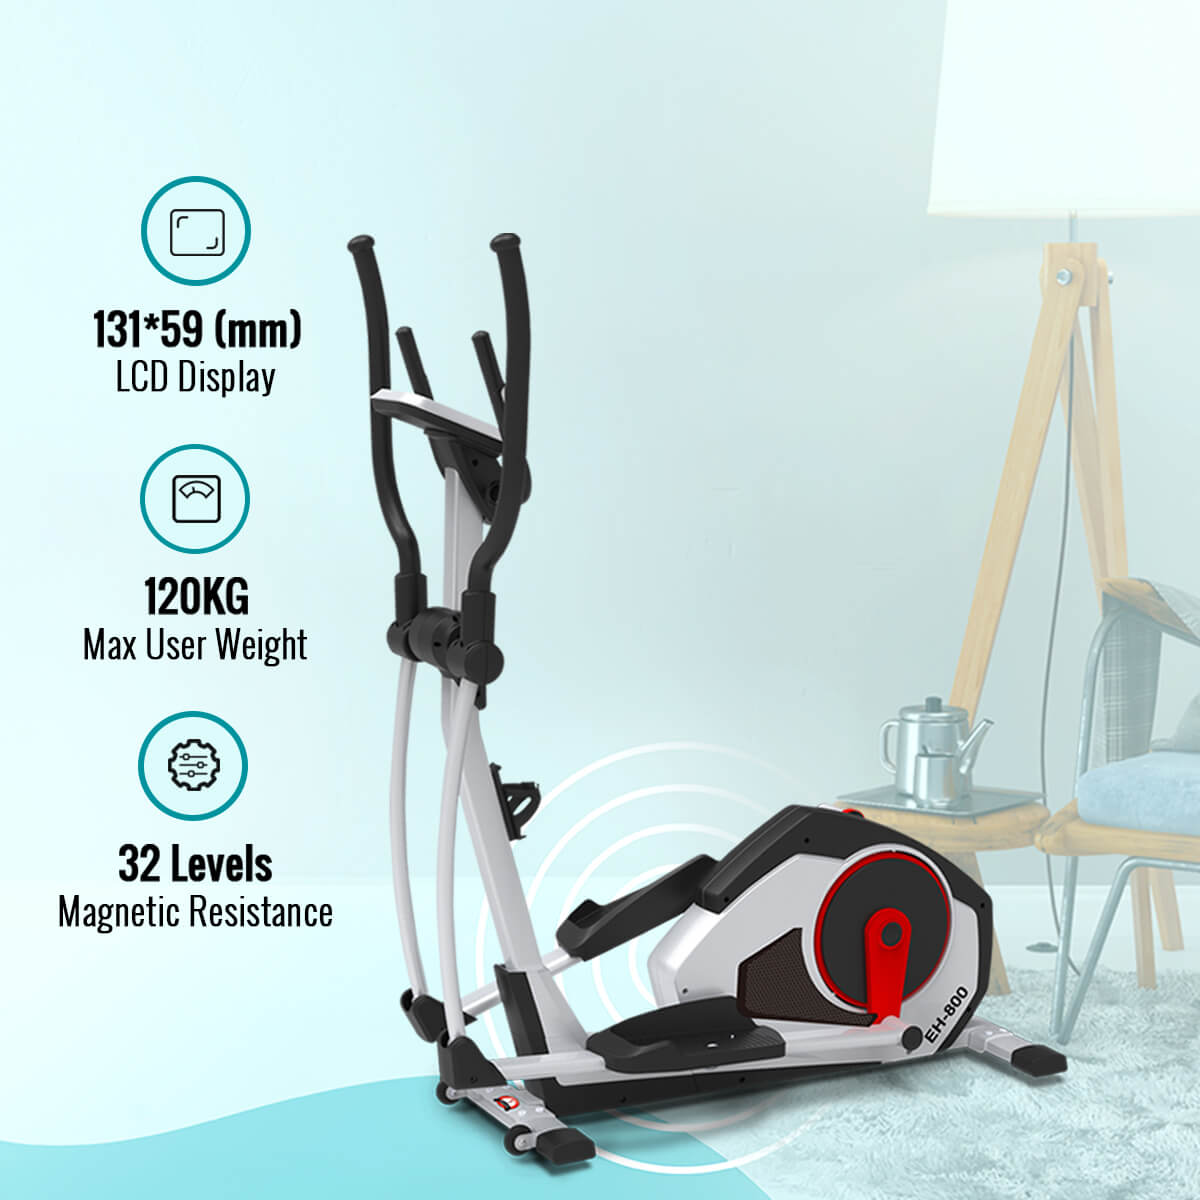 Buy Powermax Fitness EH-800 Motorized Elliptical Cross Trainer with Magnetic Resistance for home use